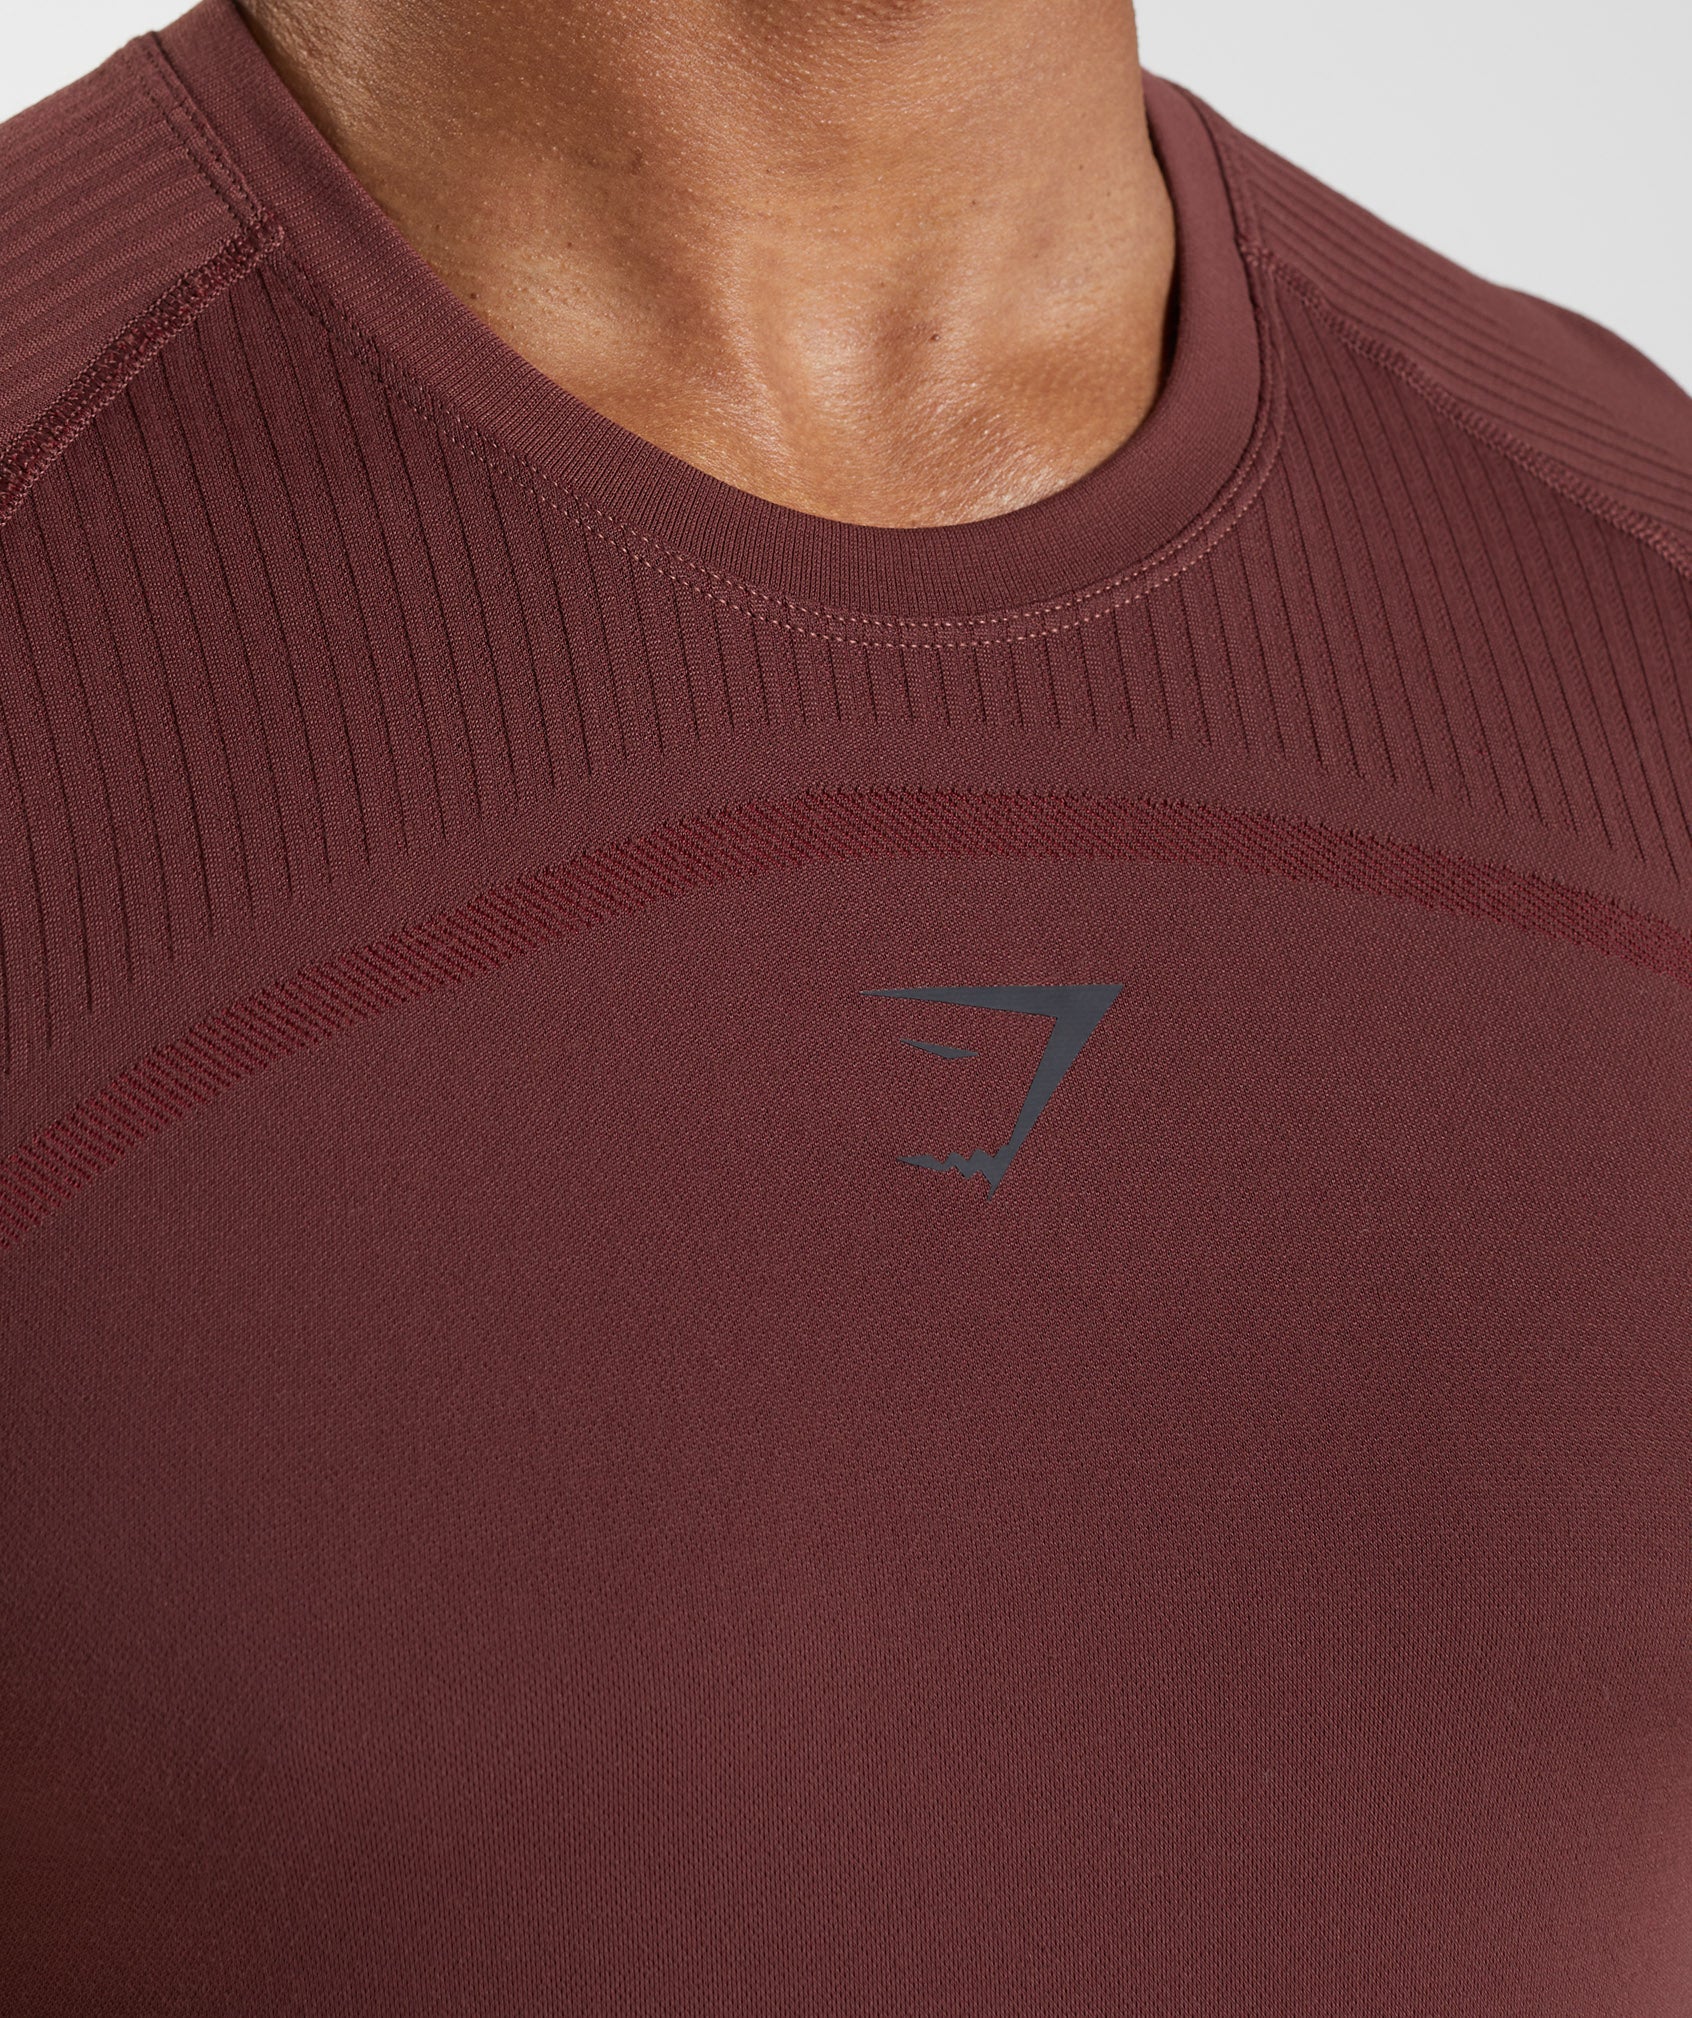 315 Seamless T-Shirt in Cherry Brown